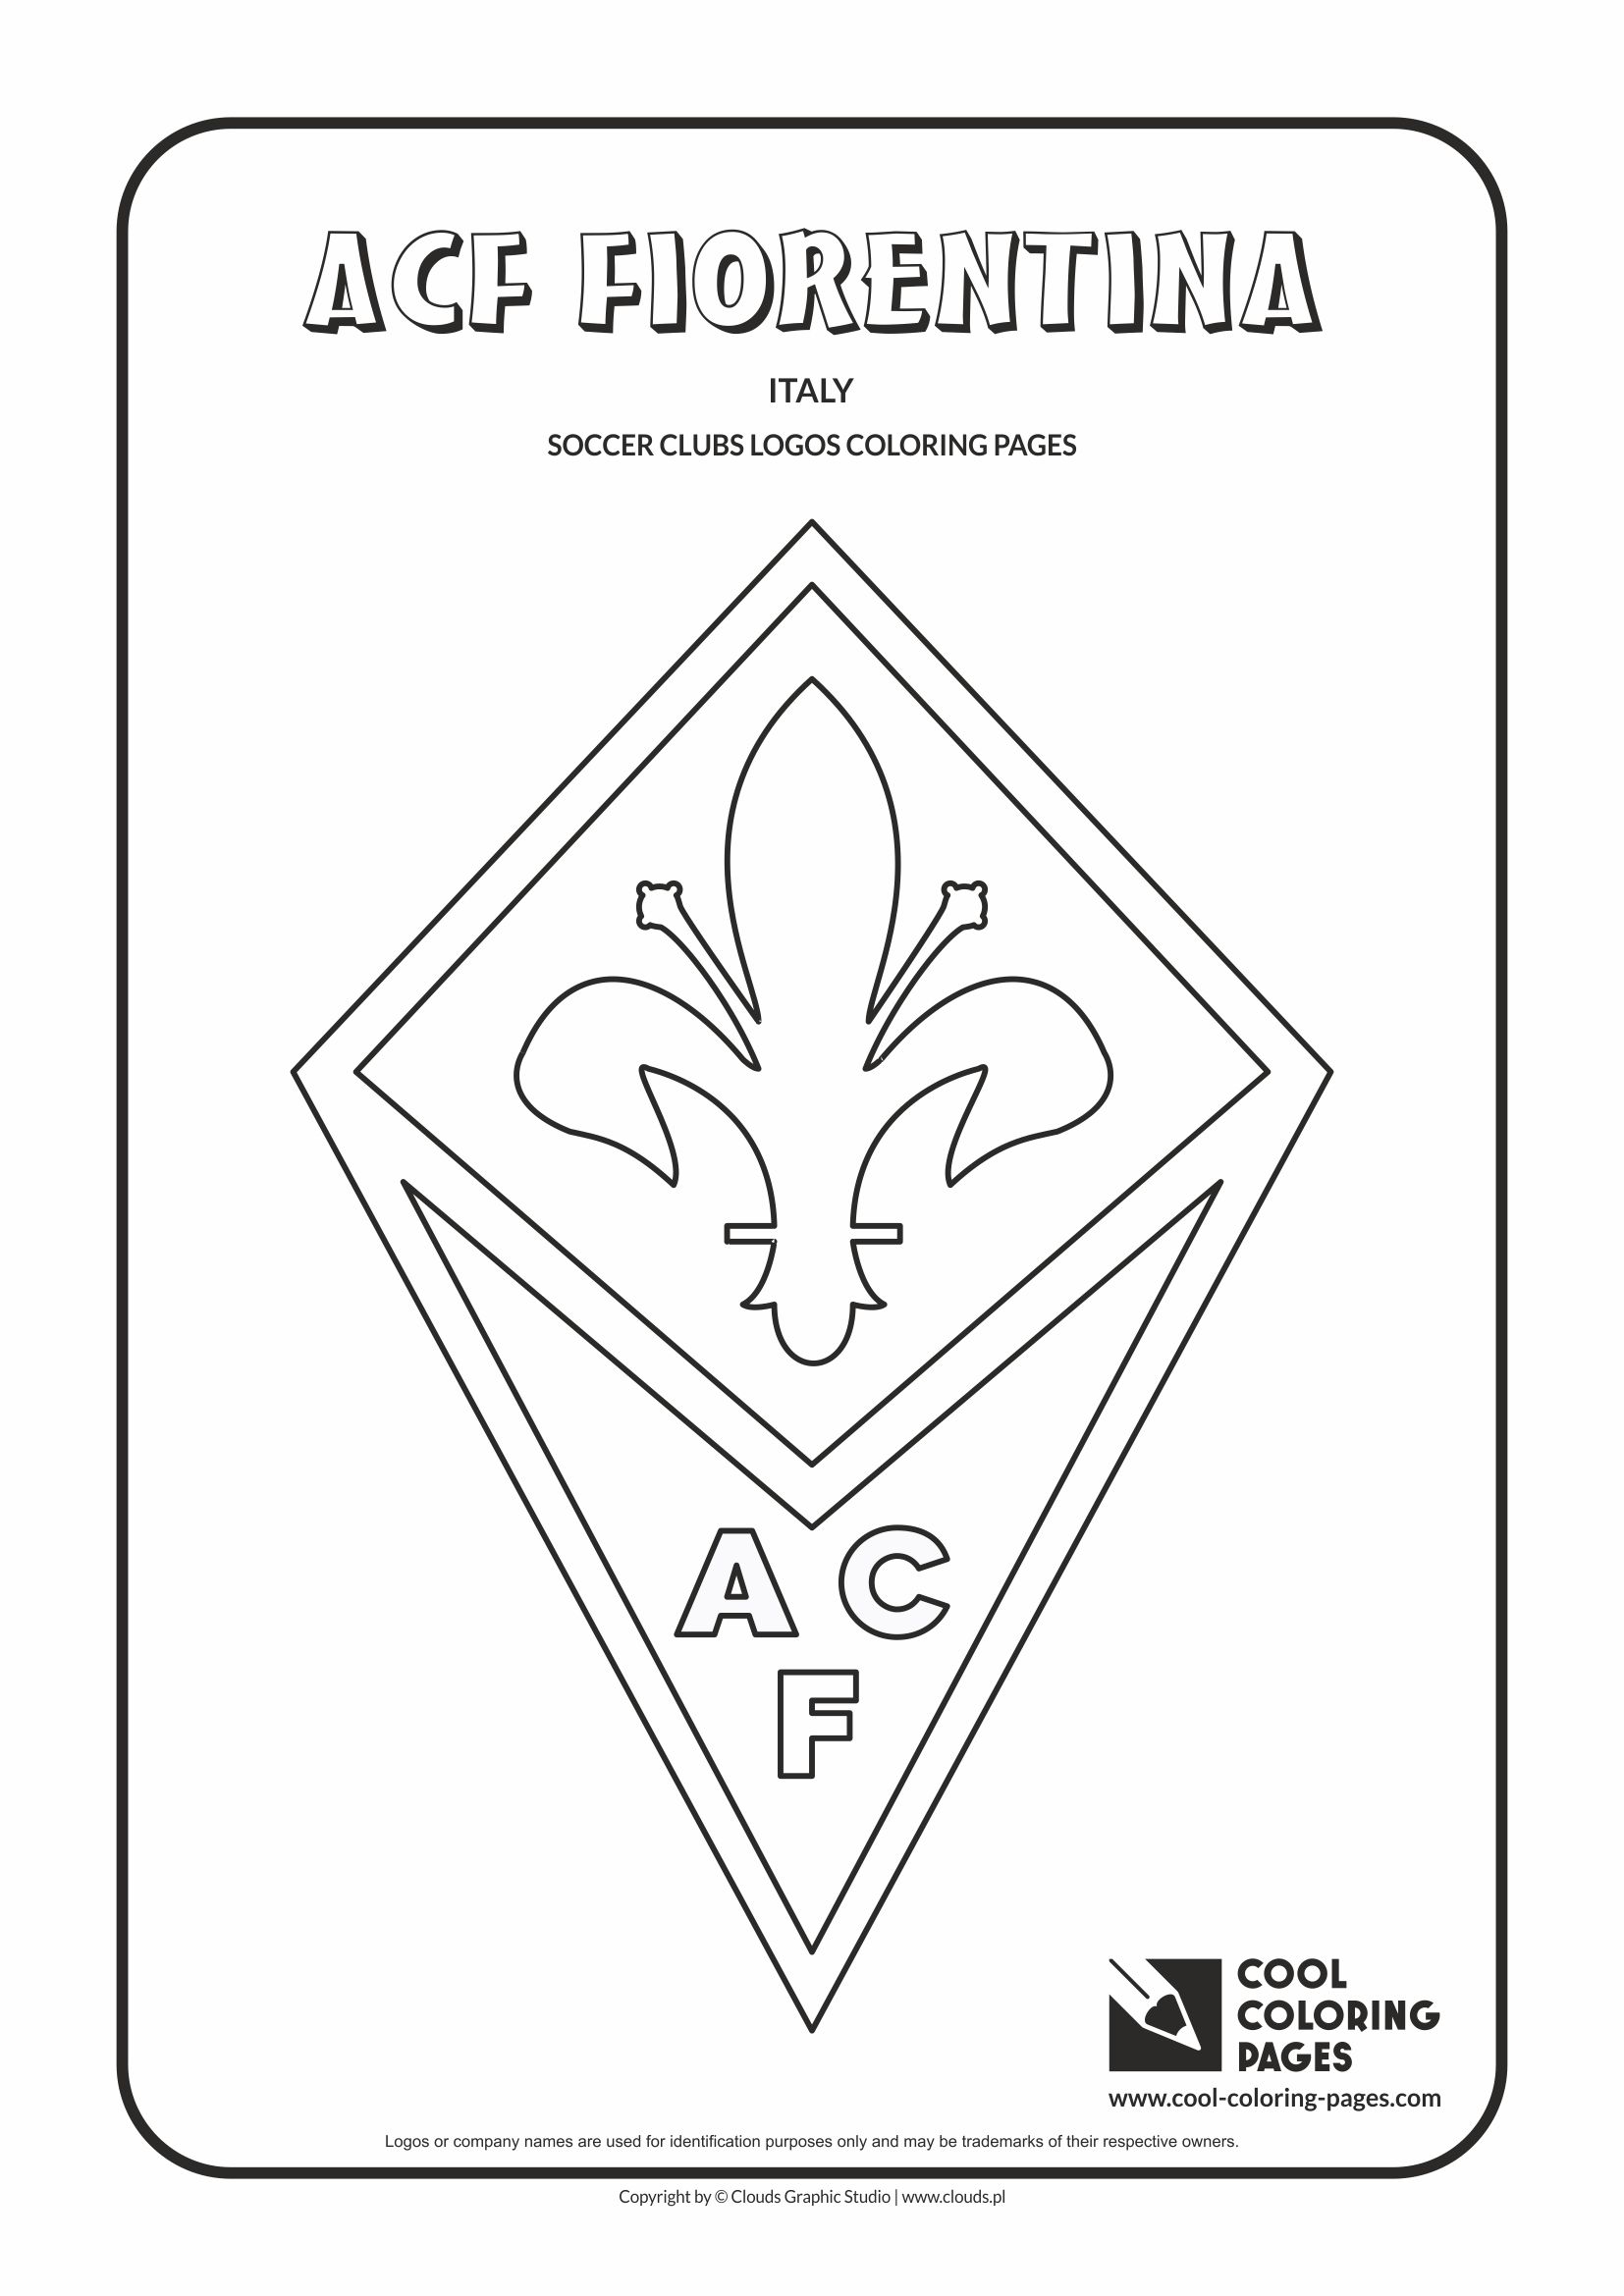 Cool Coloring Pages ACF Fiorentina logo coloring page - Cool Coloring